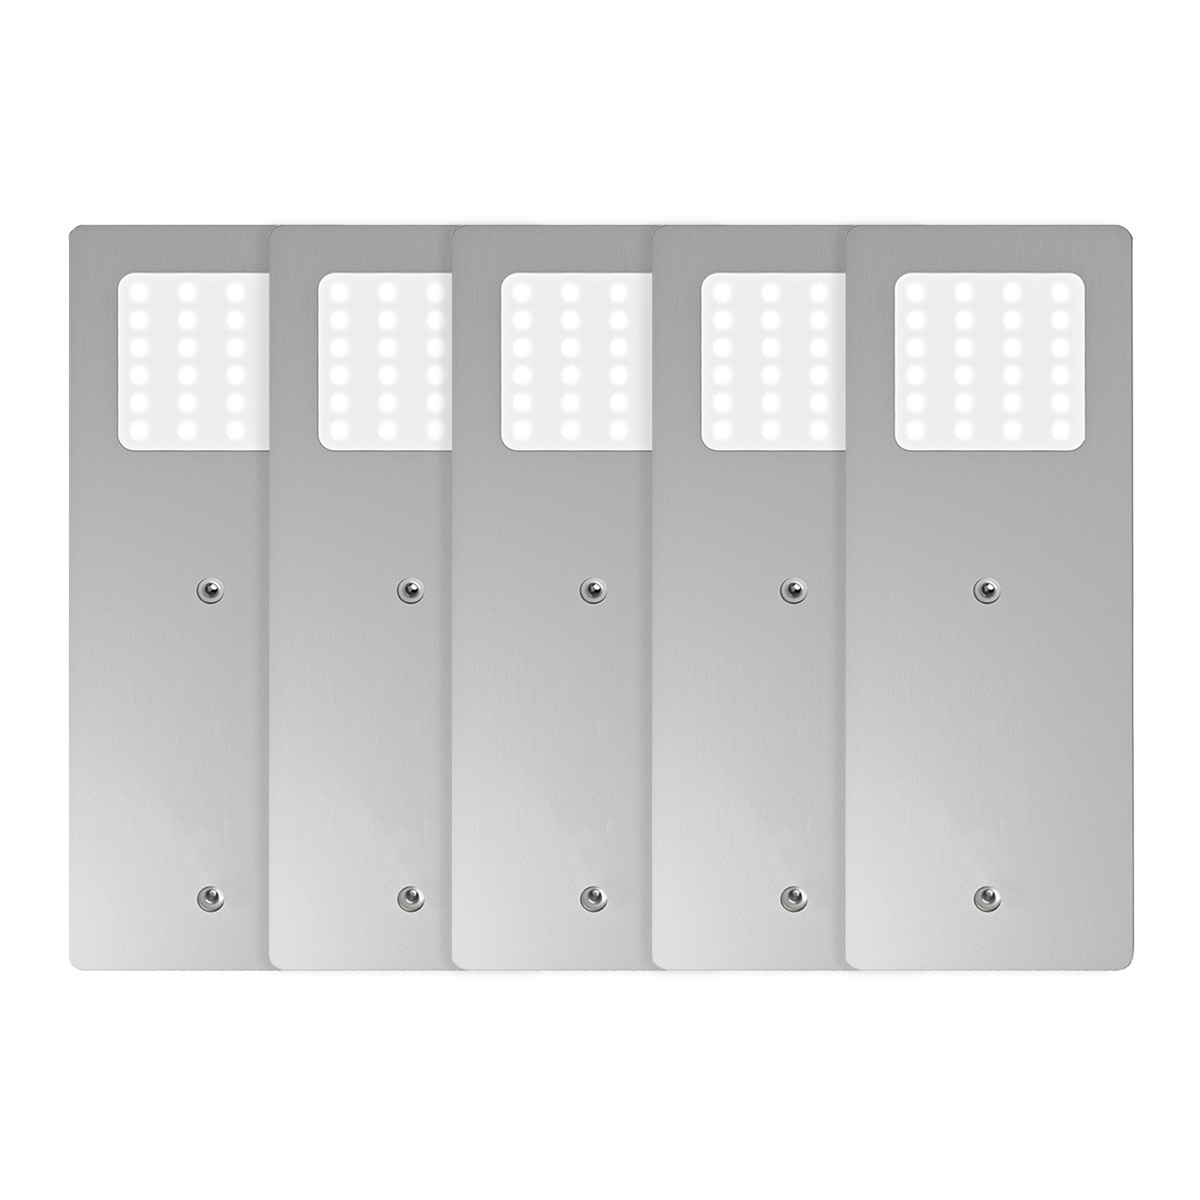 View 5 x Recti Superslim 5w LED Cabinet Lights information